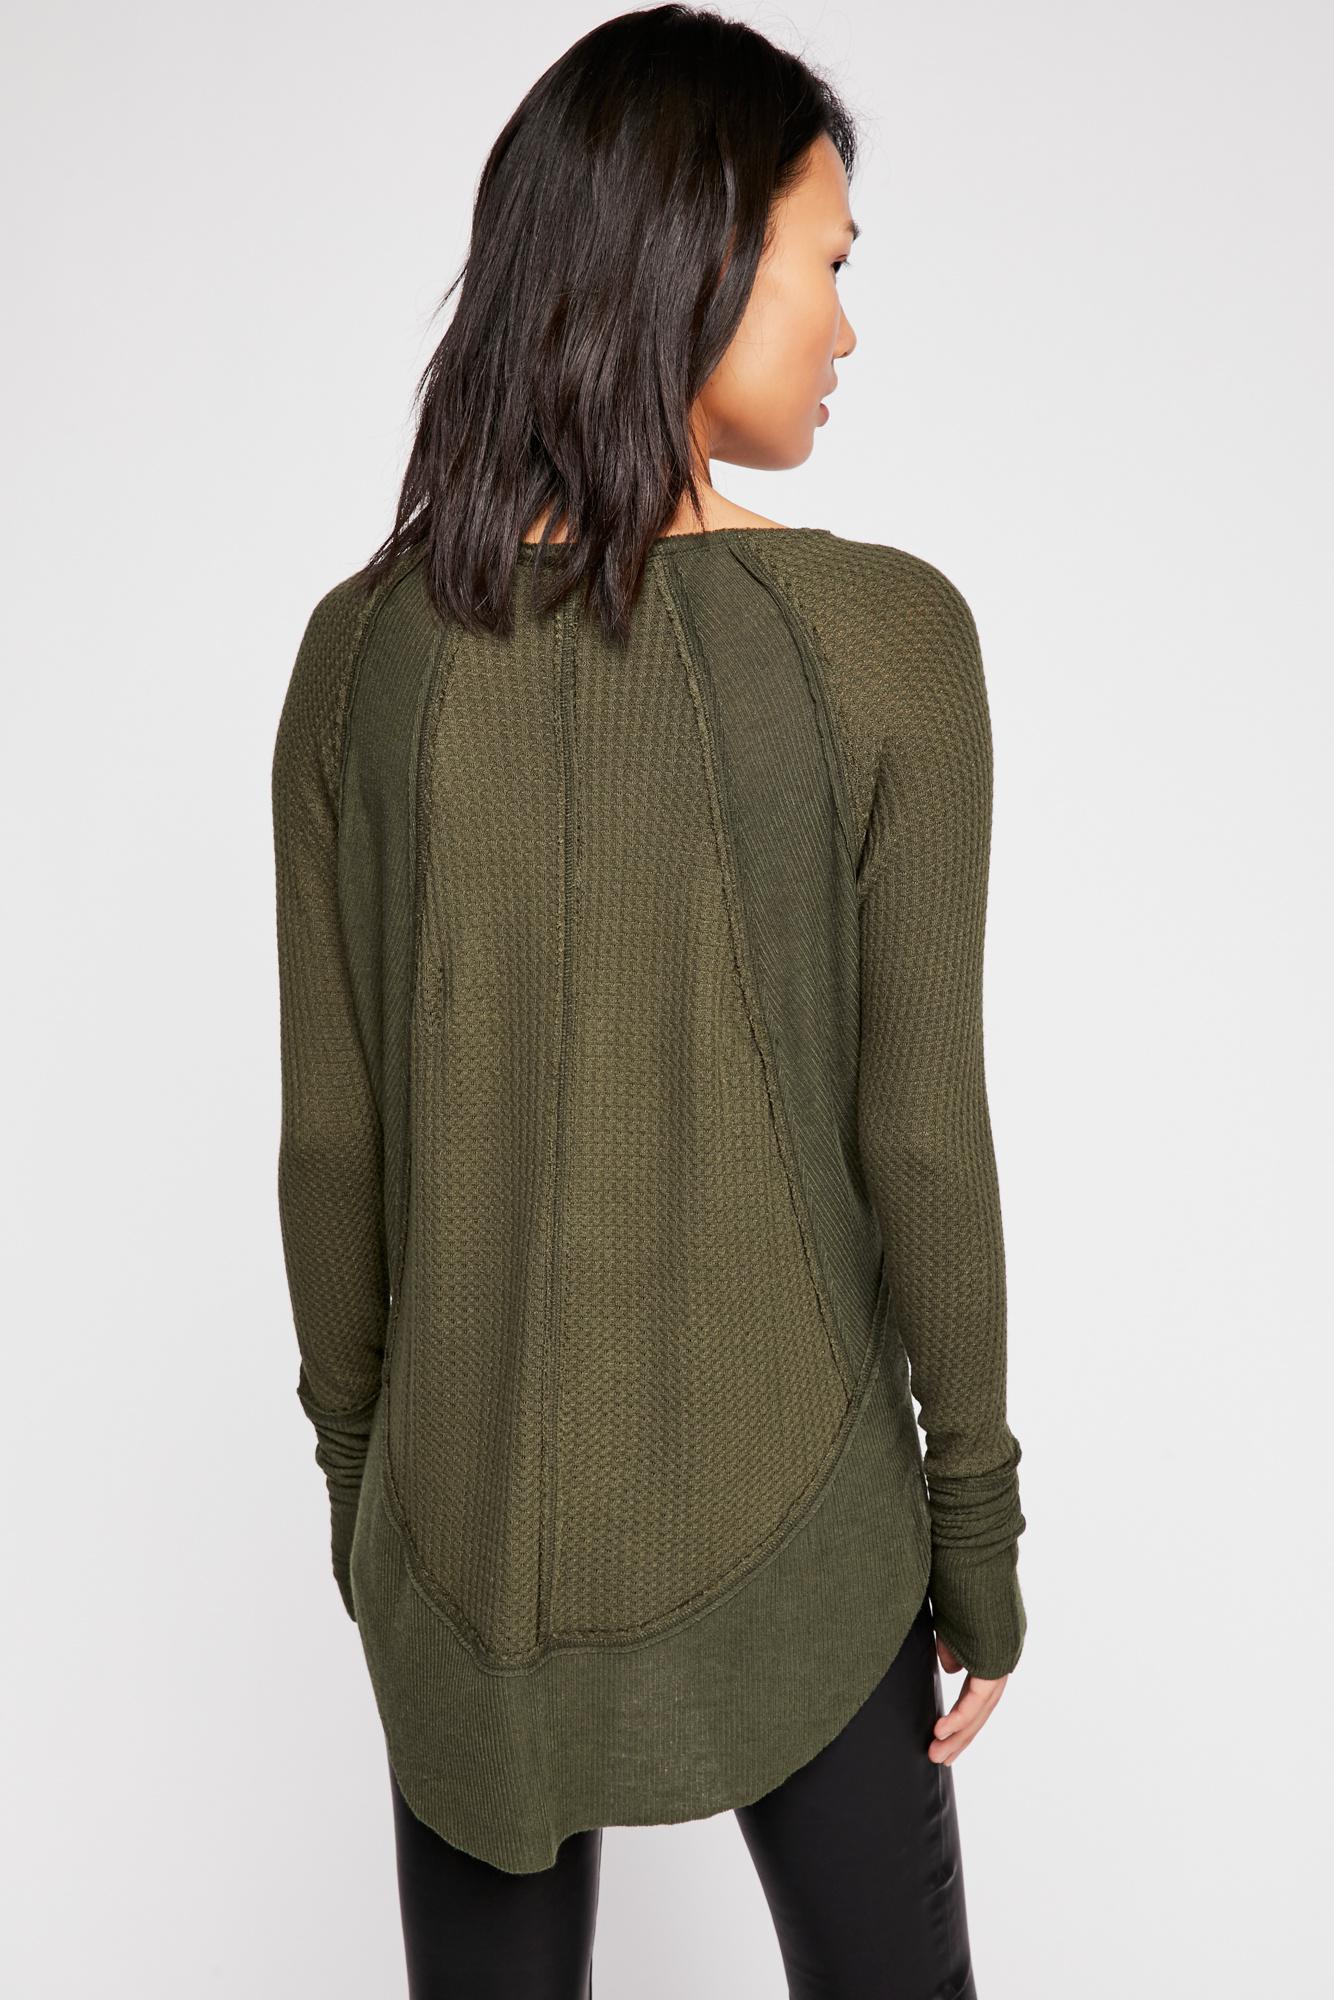 Free People We The Free Catalina Thermal Top in Green | Lyst